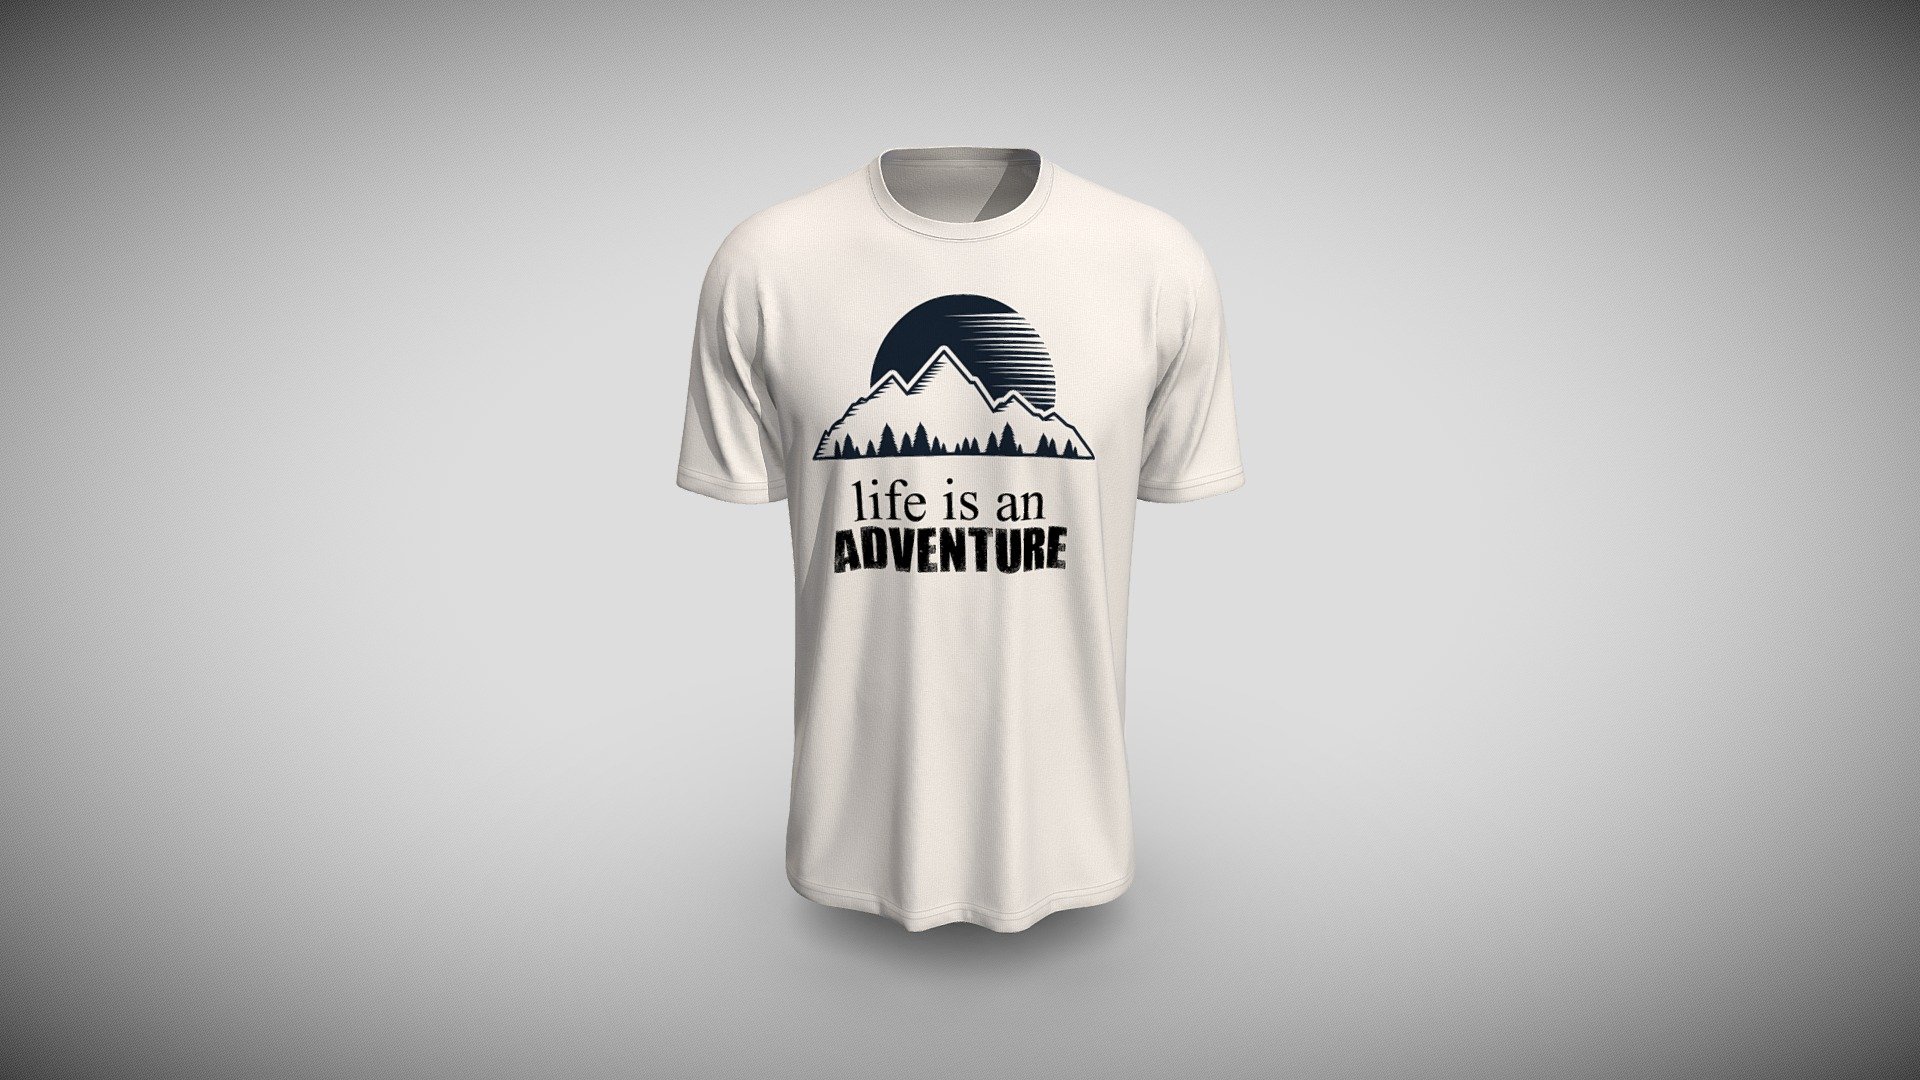 Cloth Title = Life Is an Adventure Printed Cotton T-shirt 

SKU = DG100125 

Category = Unisex 

Product Type = Tee 

Cloth Length = Regular 

Body Fit = Regular Fit 

Occasion = Casual  

Sleeve Style = Set In Sleeve 


Our Services:

3D Apparel Design.

OBJ,FBX,GLTF Making with High/Low Poly.

Fabric Digitalization.

Mockup making.

3D Teck Pack.

Pattern Making.

2D Illustration.

Cloth Animation and 360 Spin Video.


Contact us:- 

Email: info@digitalfashionwear.com 

Website: https://digitalfashionwear.com 


We designed all the types of cloth specially focused on product visualization, e-commerce, fitting, and production. 

We will design: 

T-shirts 

Polo shirts 

Hoodies 

Sweatshirt 

Jackets 

Shirts 

TankTops 

Trousers 

Bras 

Underwear 

Blazer 

Aprons 

Leggings 

and All Fashion items. 





Our goal is to make sure what we provide you, meets your demand 3d model